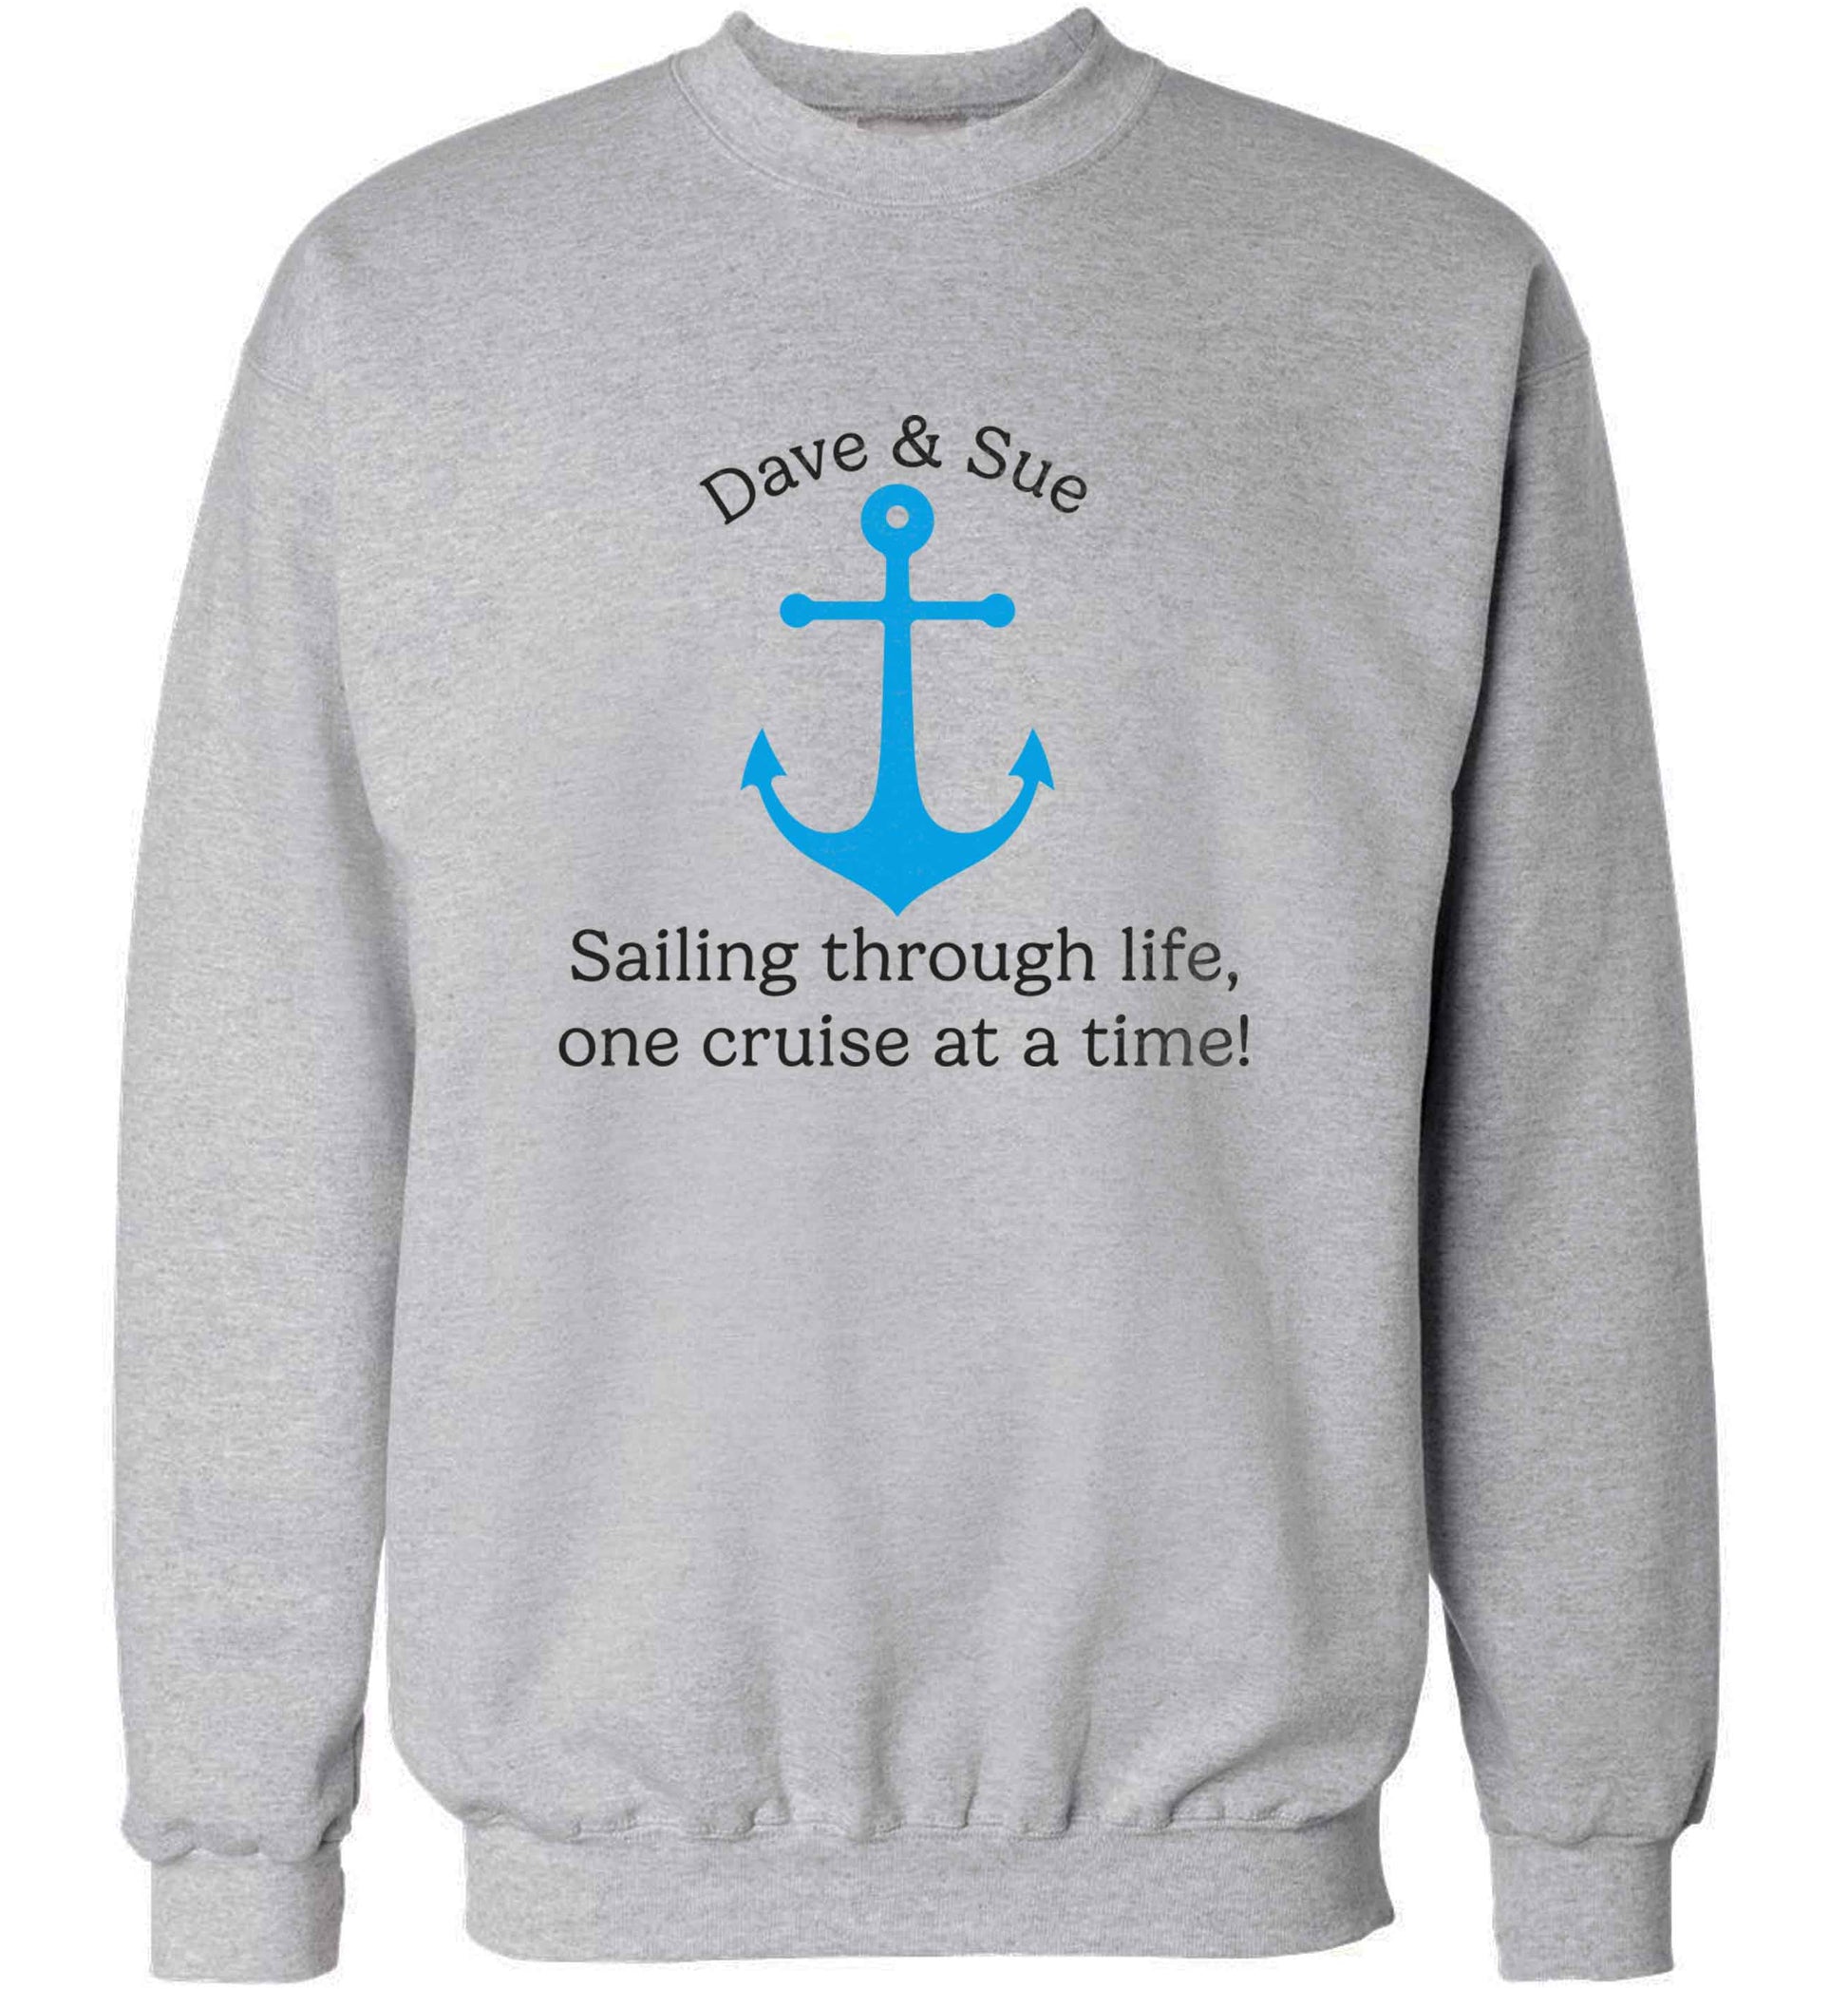 Sailing through life one cruise at a time - personalised adult's unisex grey sweater 2XL